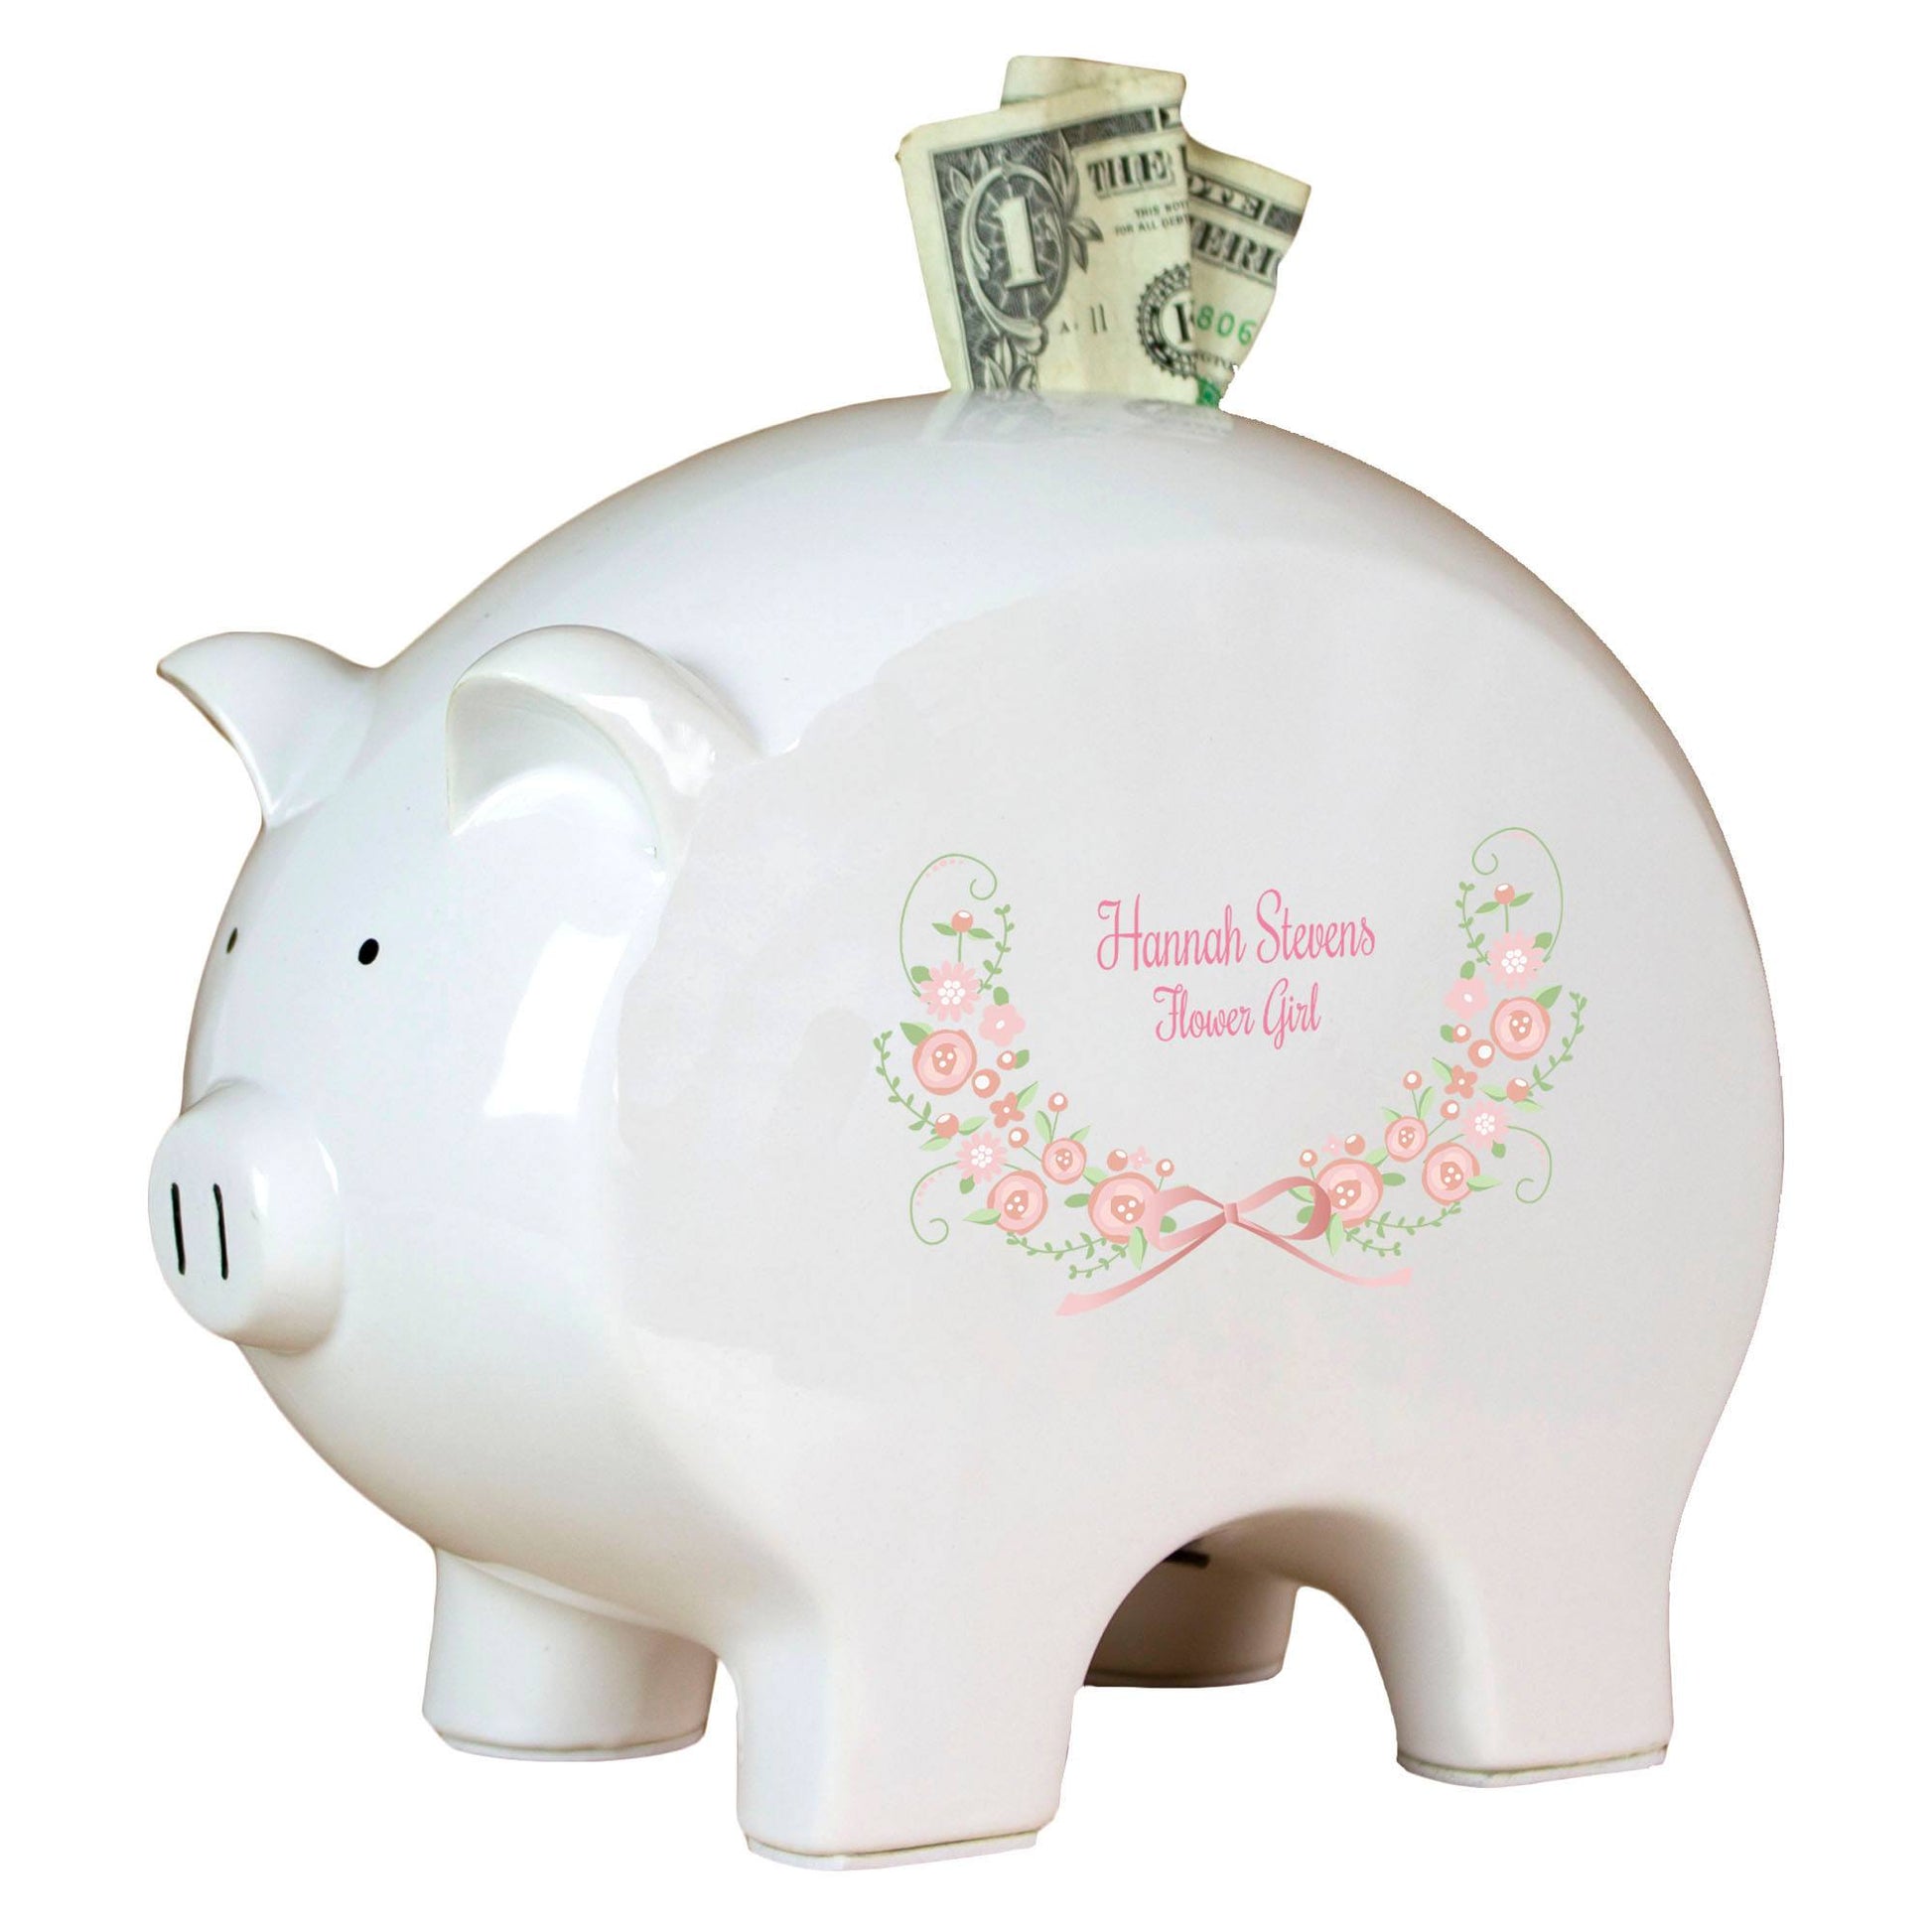 Personalized Piggy Bank with Hc Blush Floral Garland design